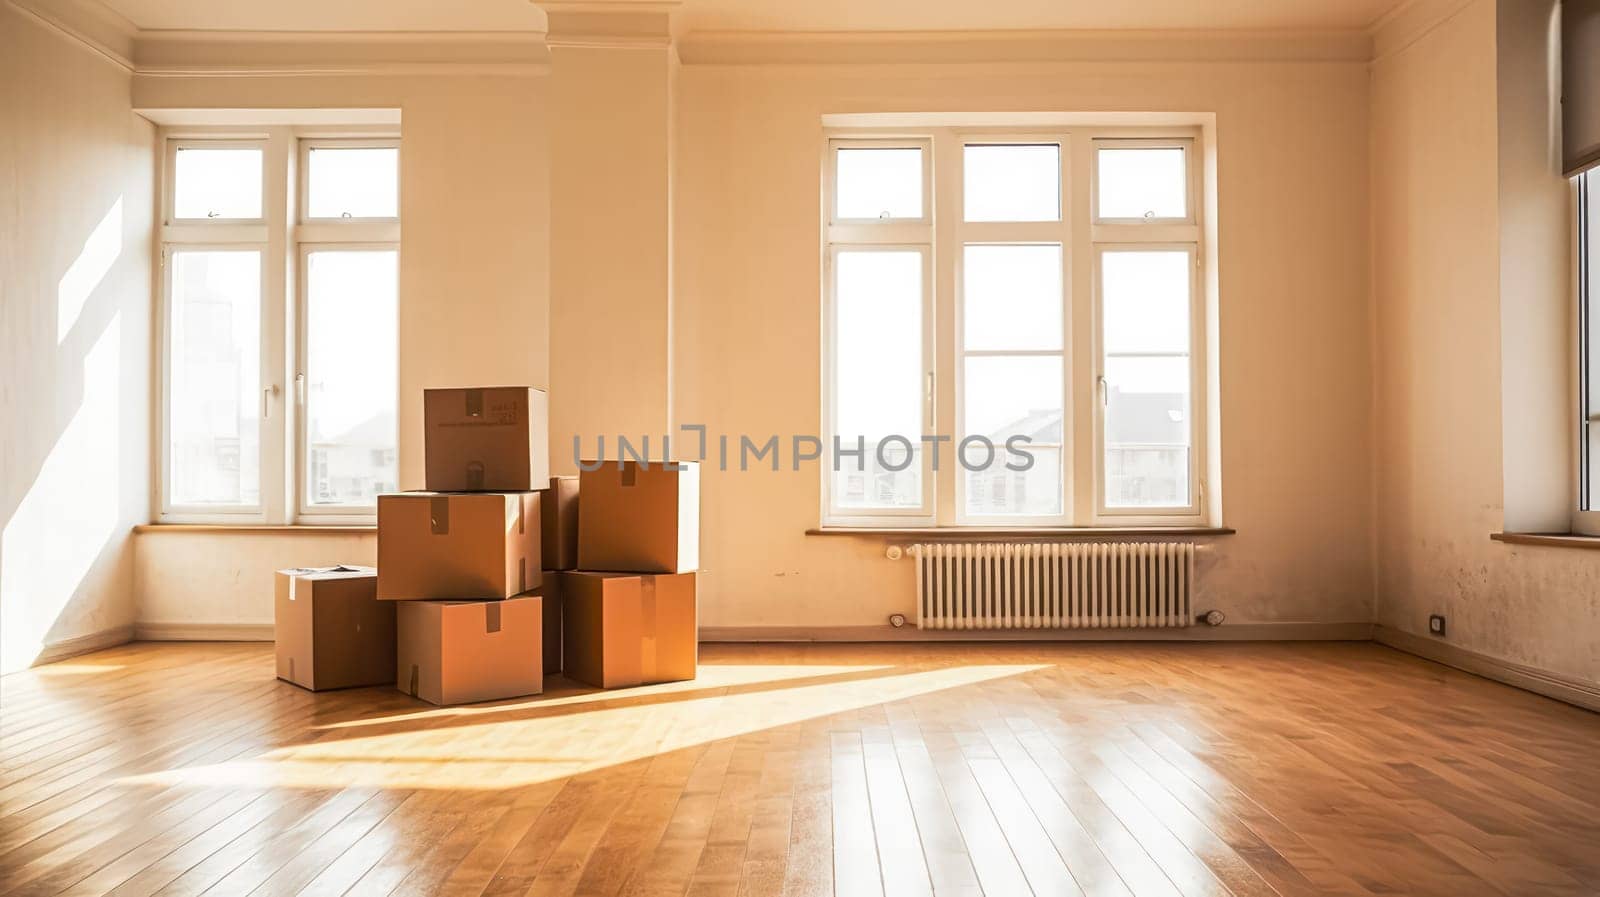 Cardboard boxes and household items indoors, ideal for moving day concepts. Space available for text or additional elements.